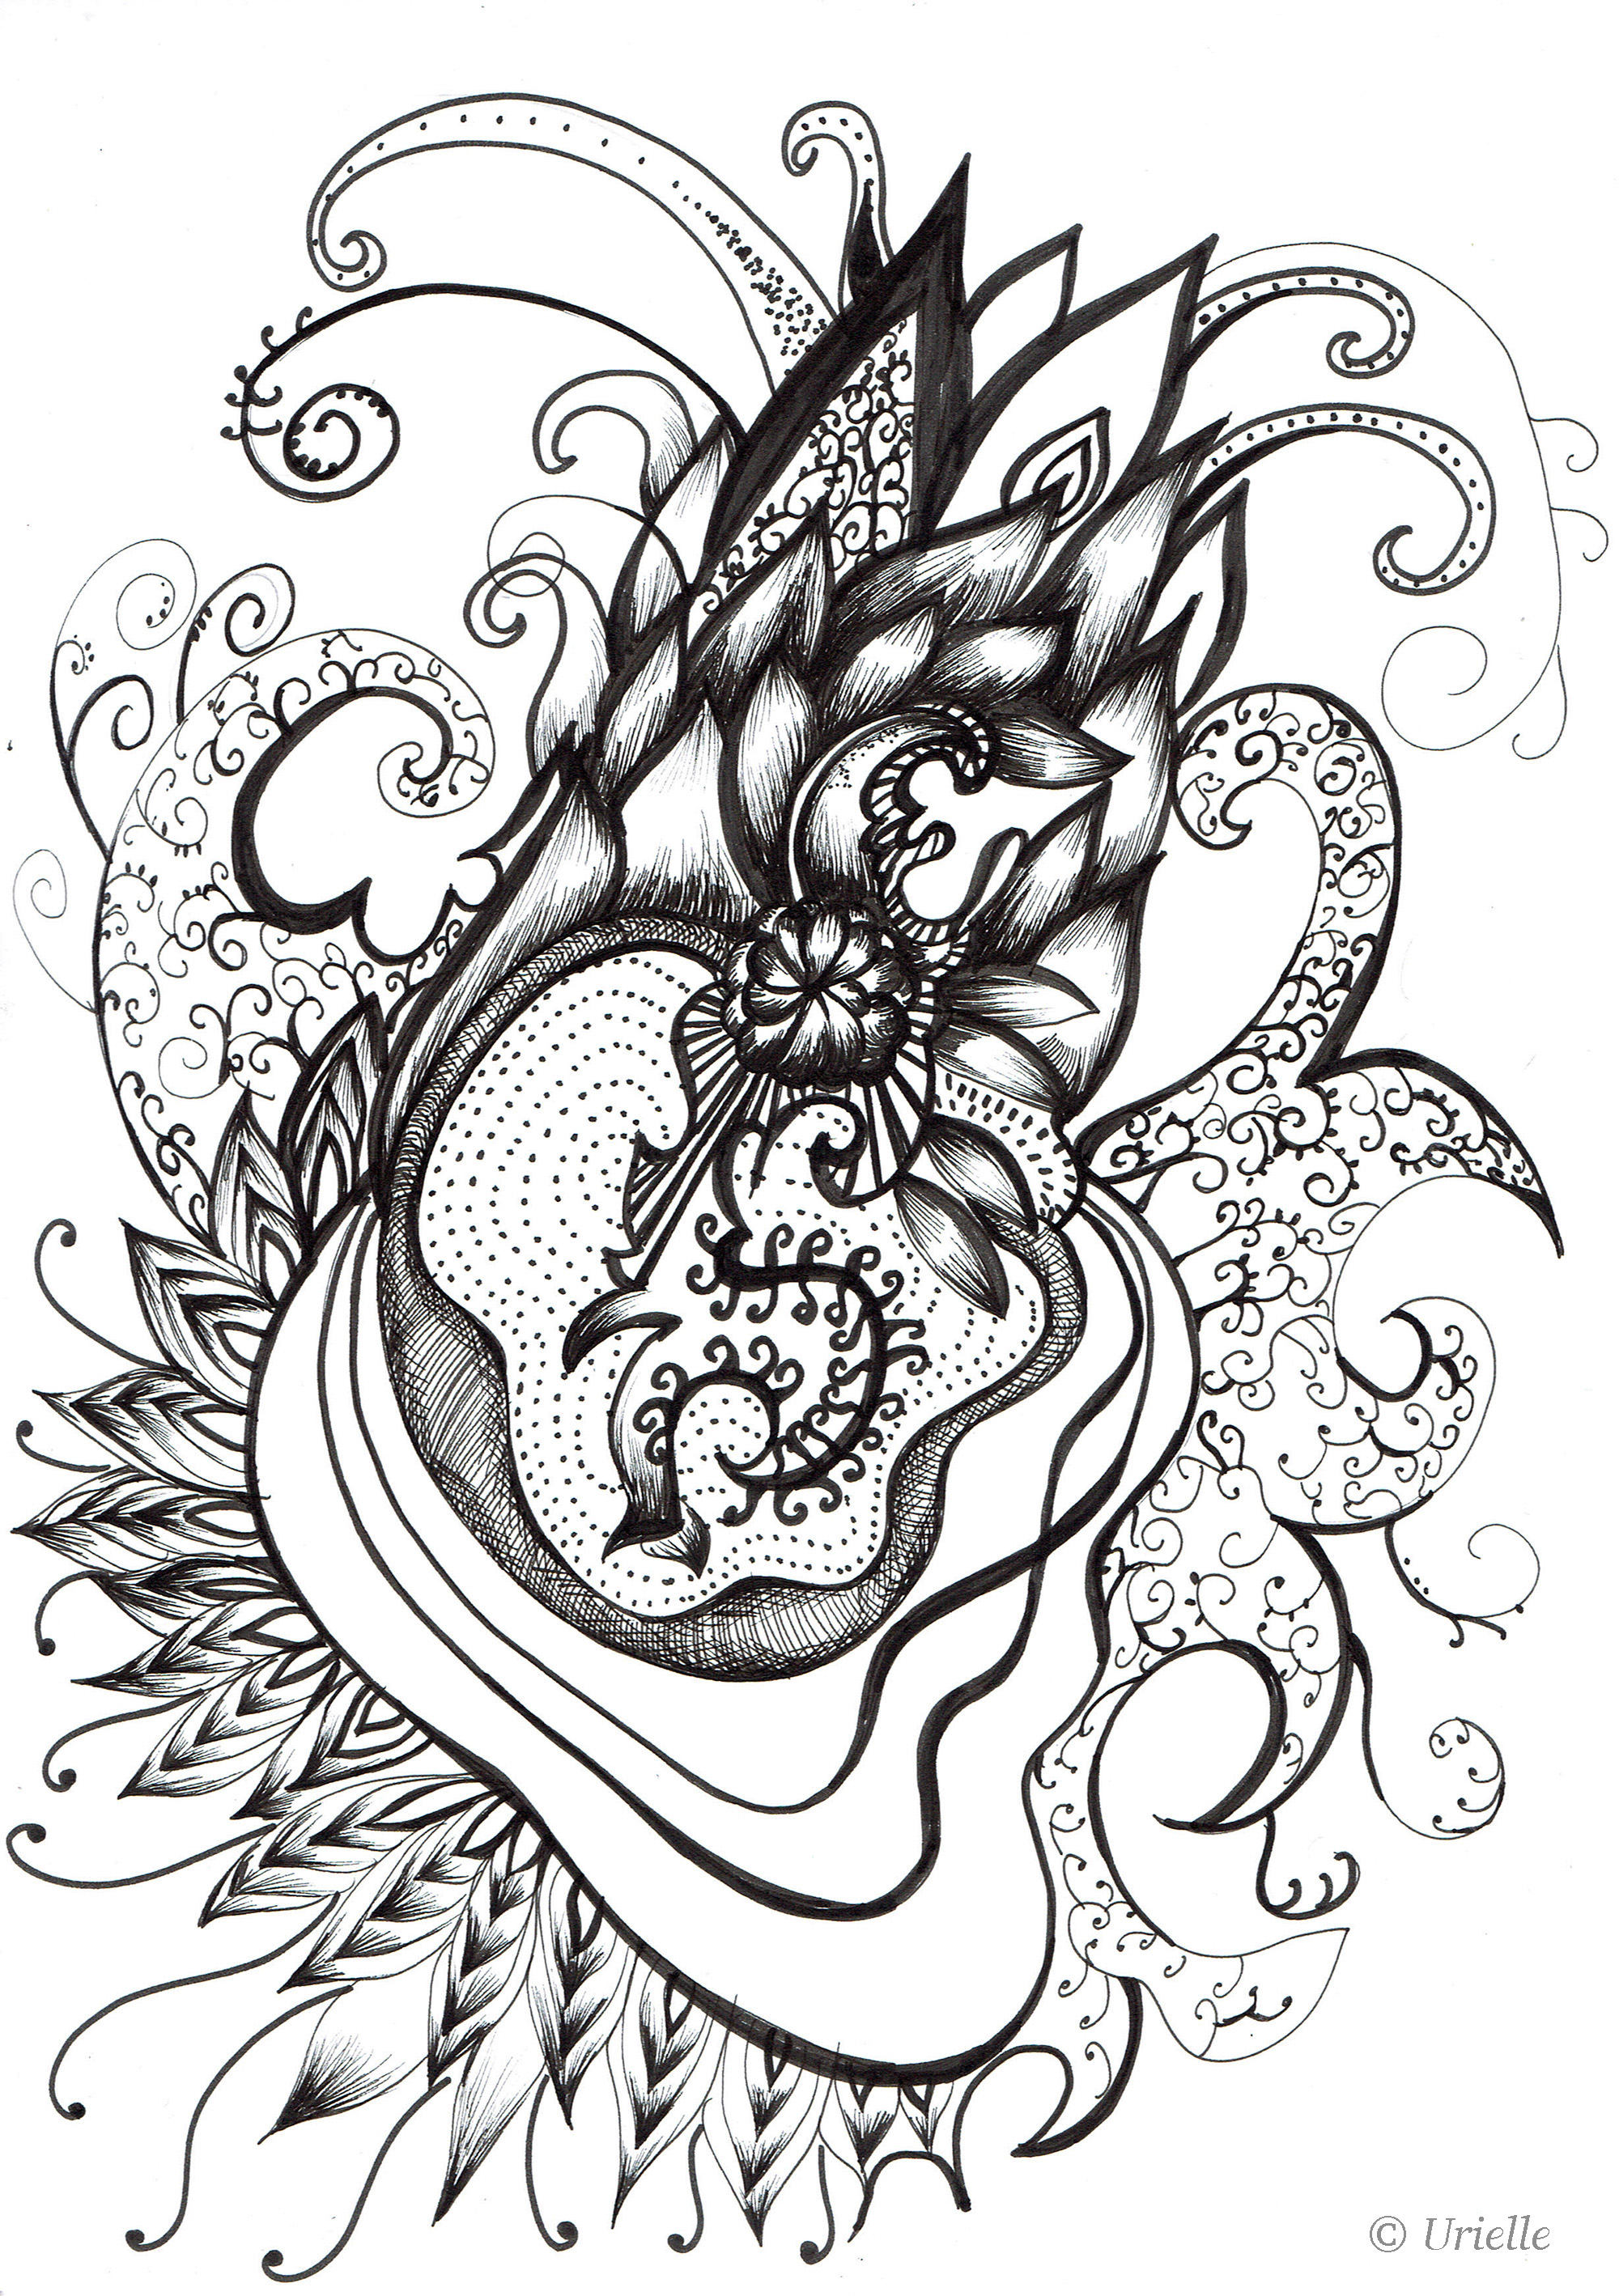 Heart - Coloring Pages for Adults